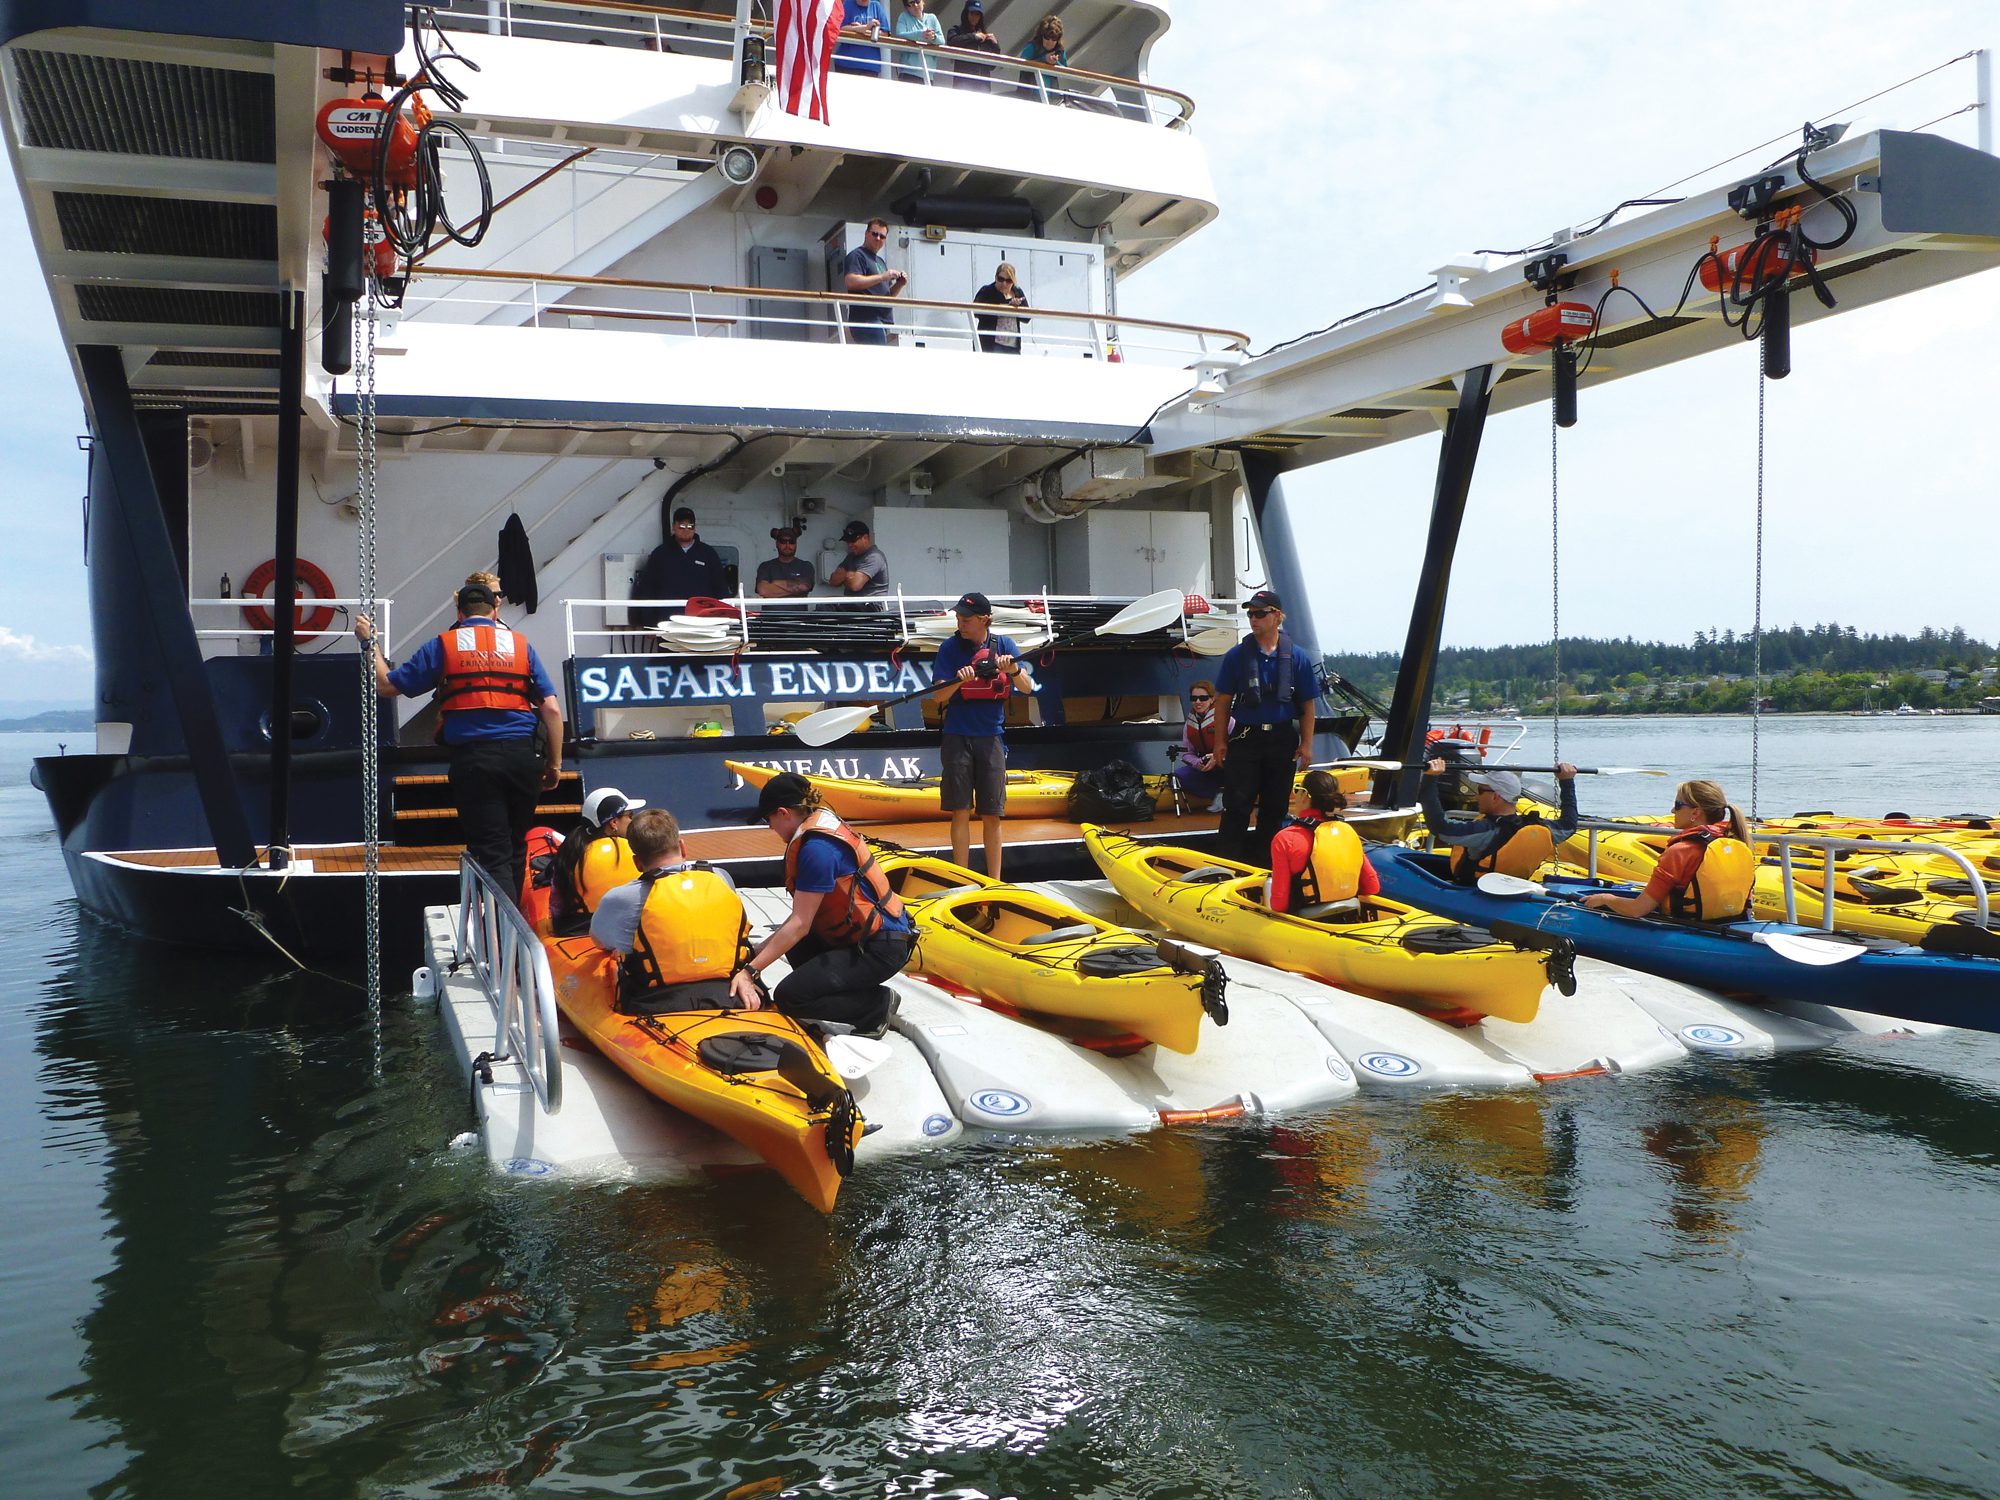 kayakers launching from the stern of the small cruise ship 'Safari Endeavour'